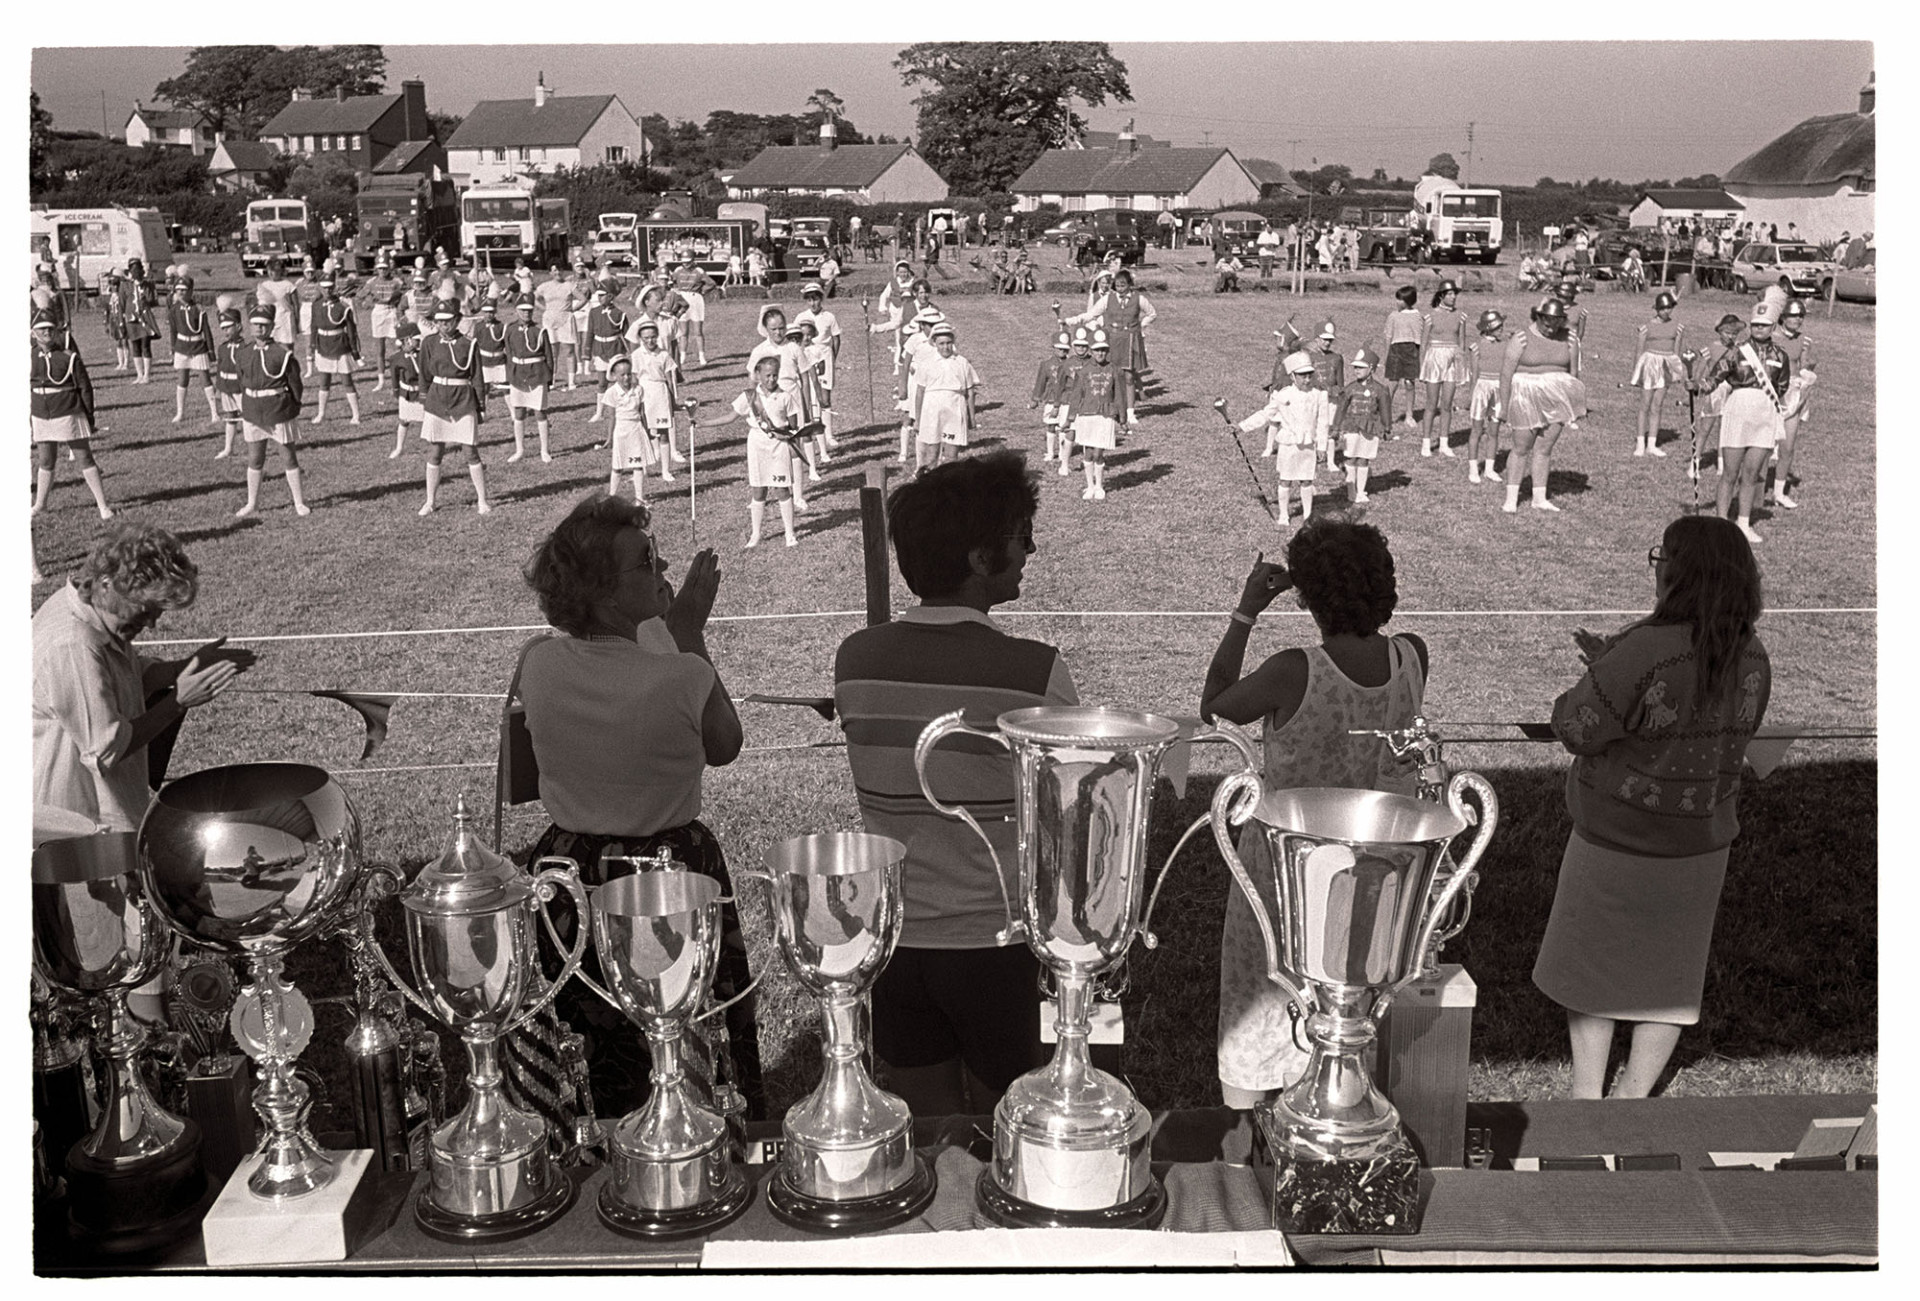 Country fair, majorettes, cups on display. 
[People watching and clapping majorettes performing at Ashreigney Country Fair. A table with trophies is in the foreground and various trucks and cars are parked in the background.]